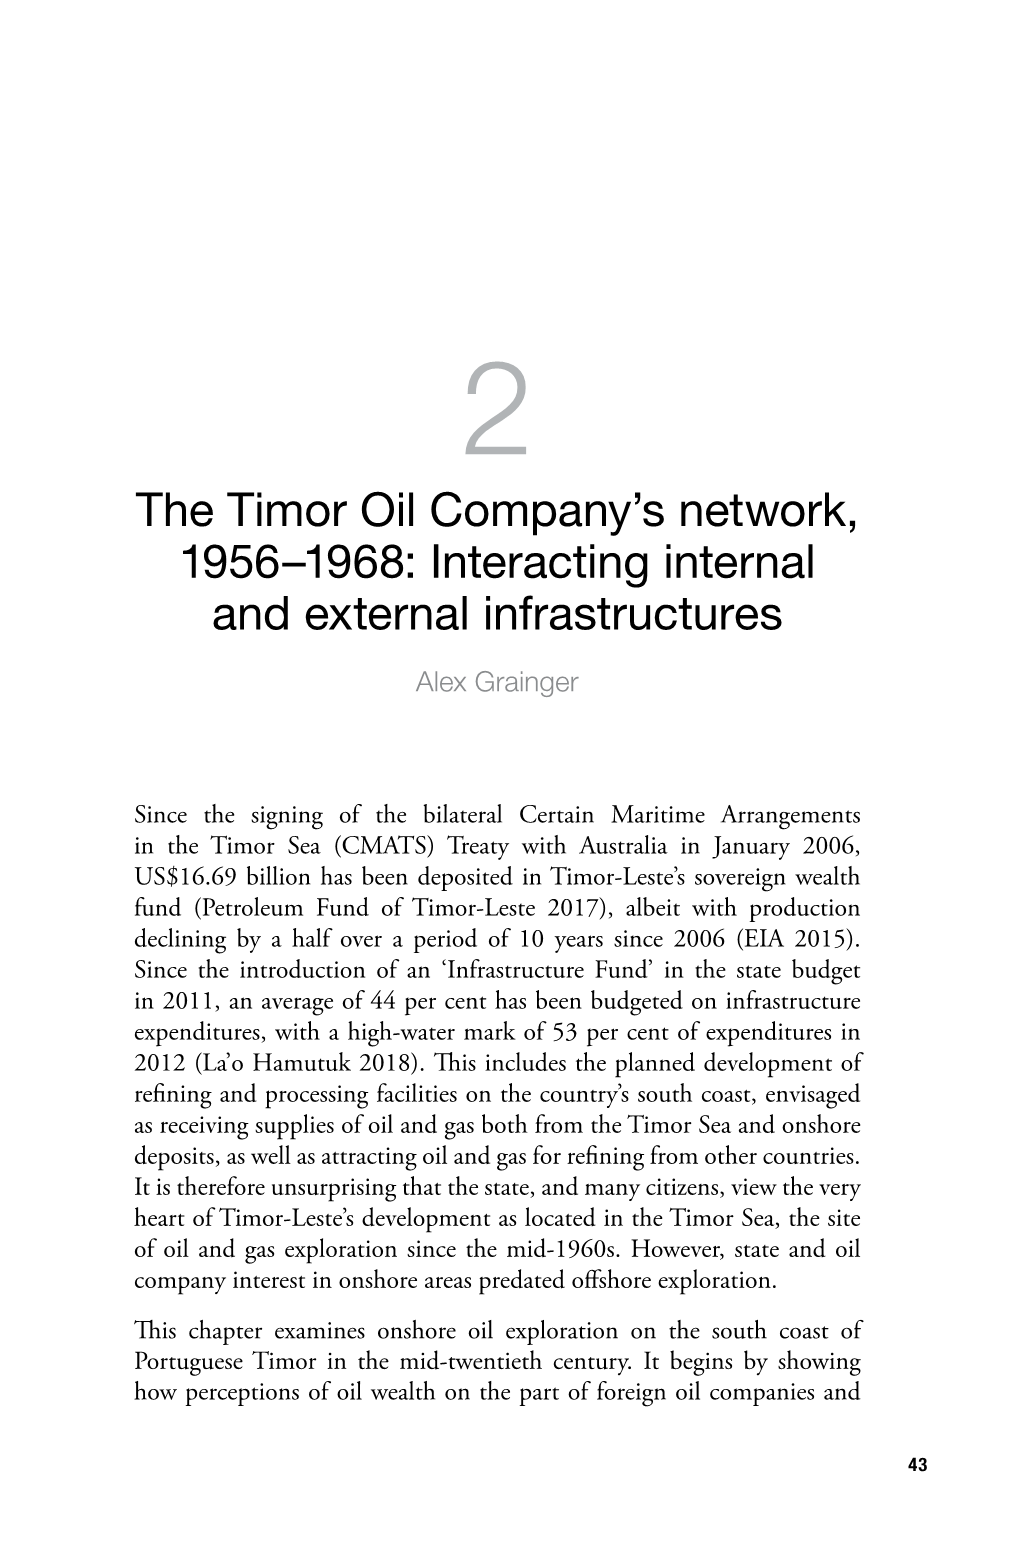 2. the Timor Oil Company's Network, 1956–1968